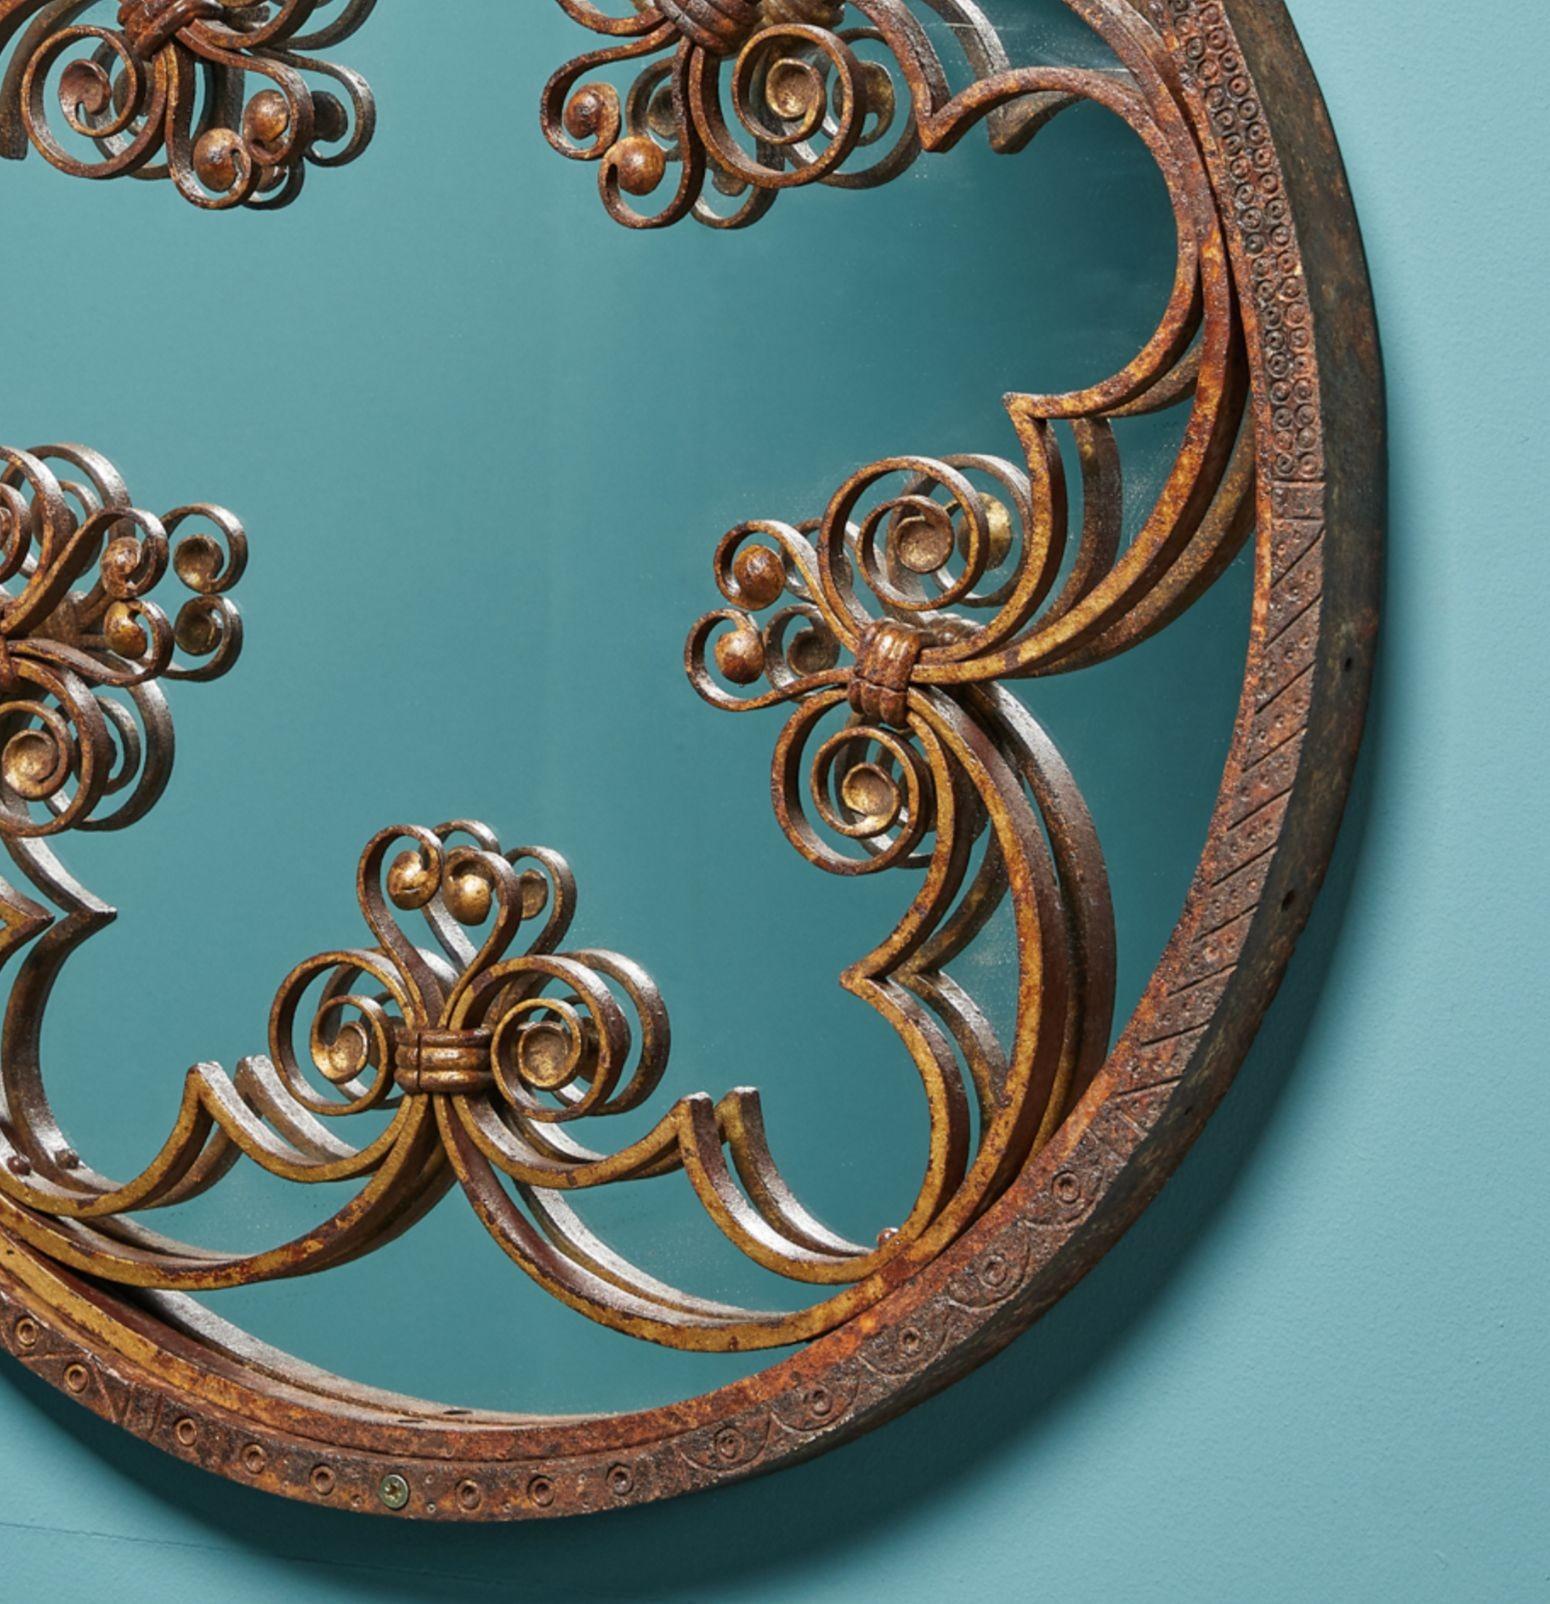 Ornately decorated with arched trefoils and twisted detailing, this antique wrought iron mirror is an elegant showpiece in any space. The ironwork is believed to have been taken from Salisbury Cathedral in the UK, known for its gothic architecture,